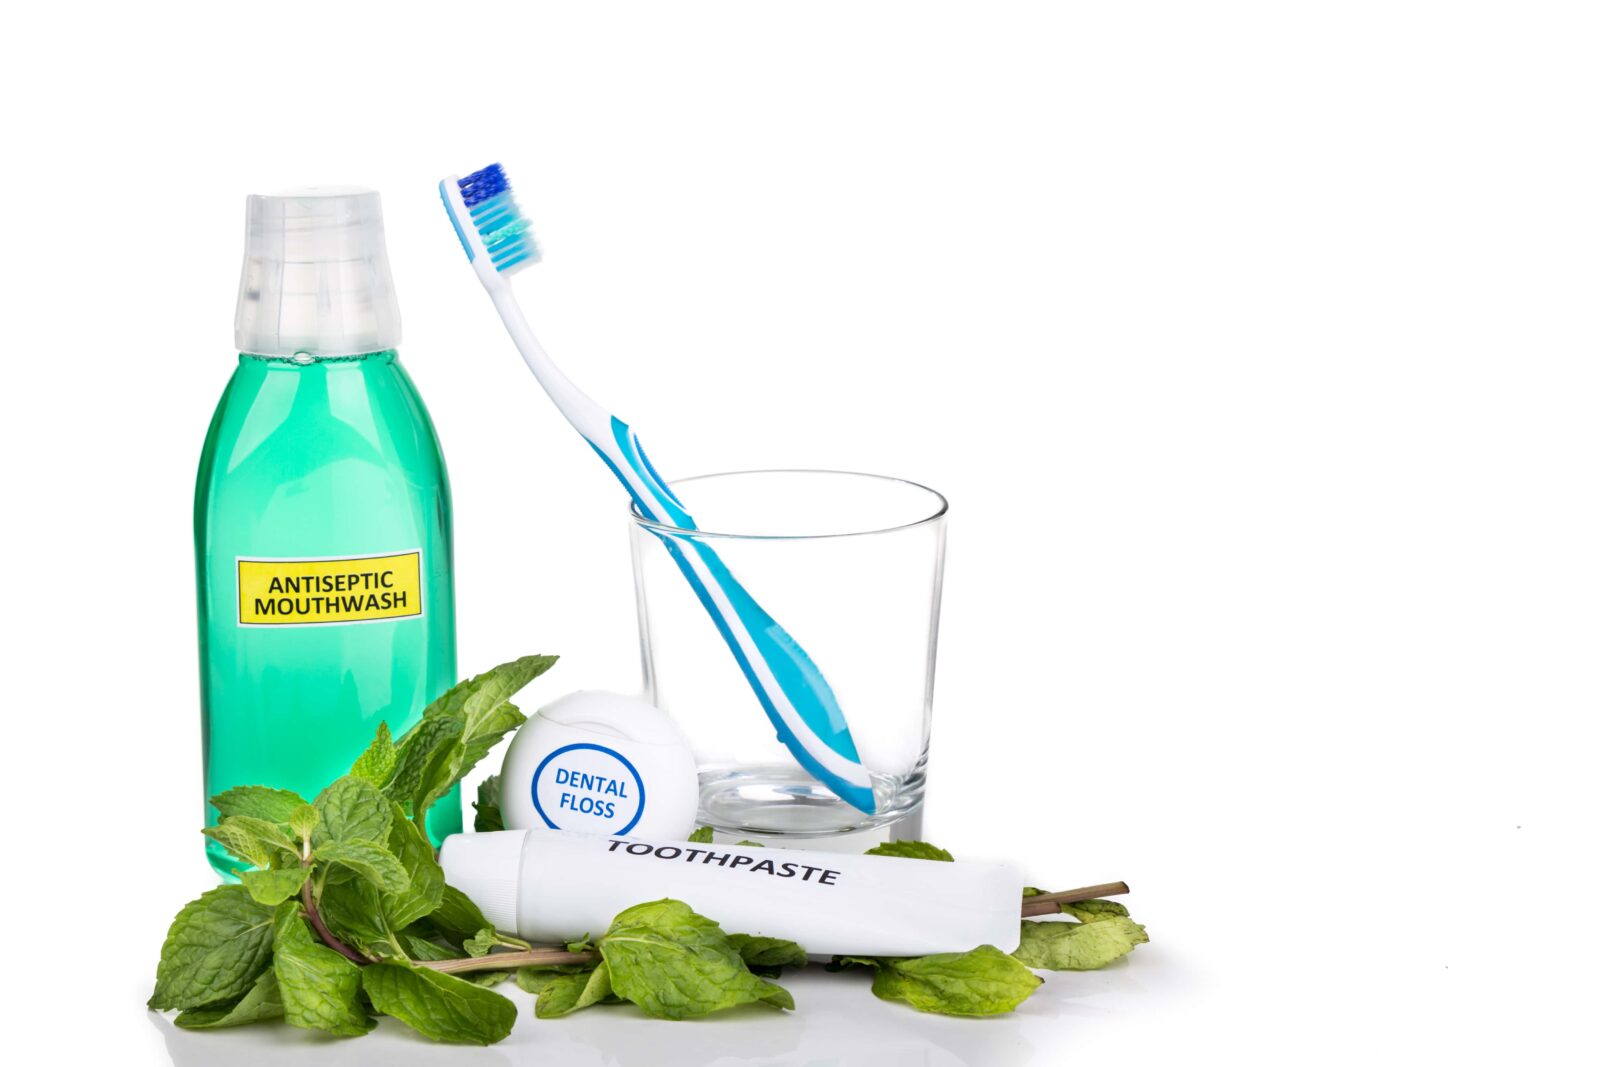 assorted dental care tools: mouthwash, toothbrush in a cup, dental floss, and toothpaste all surrounded by mint leaves on a white background